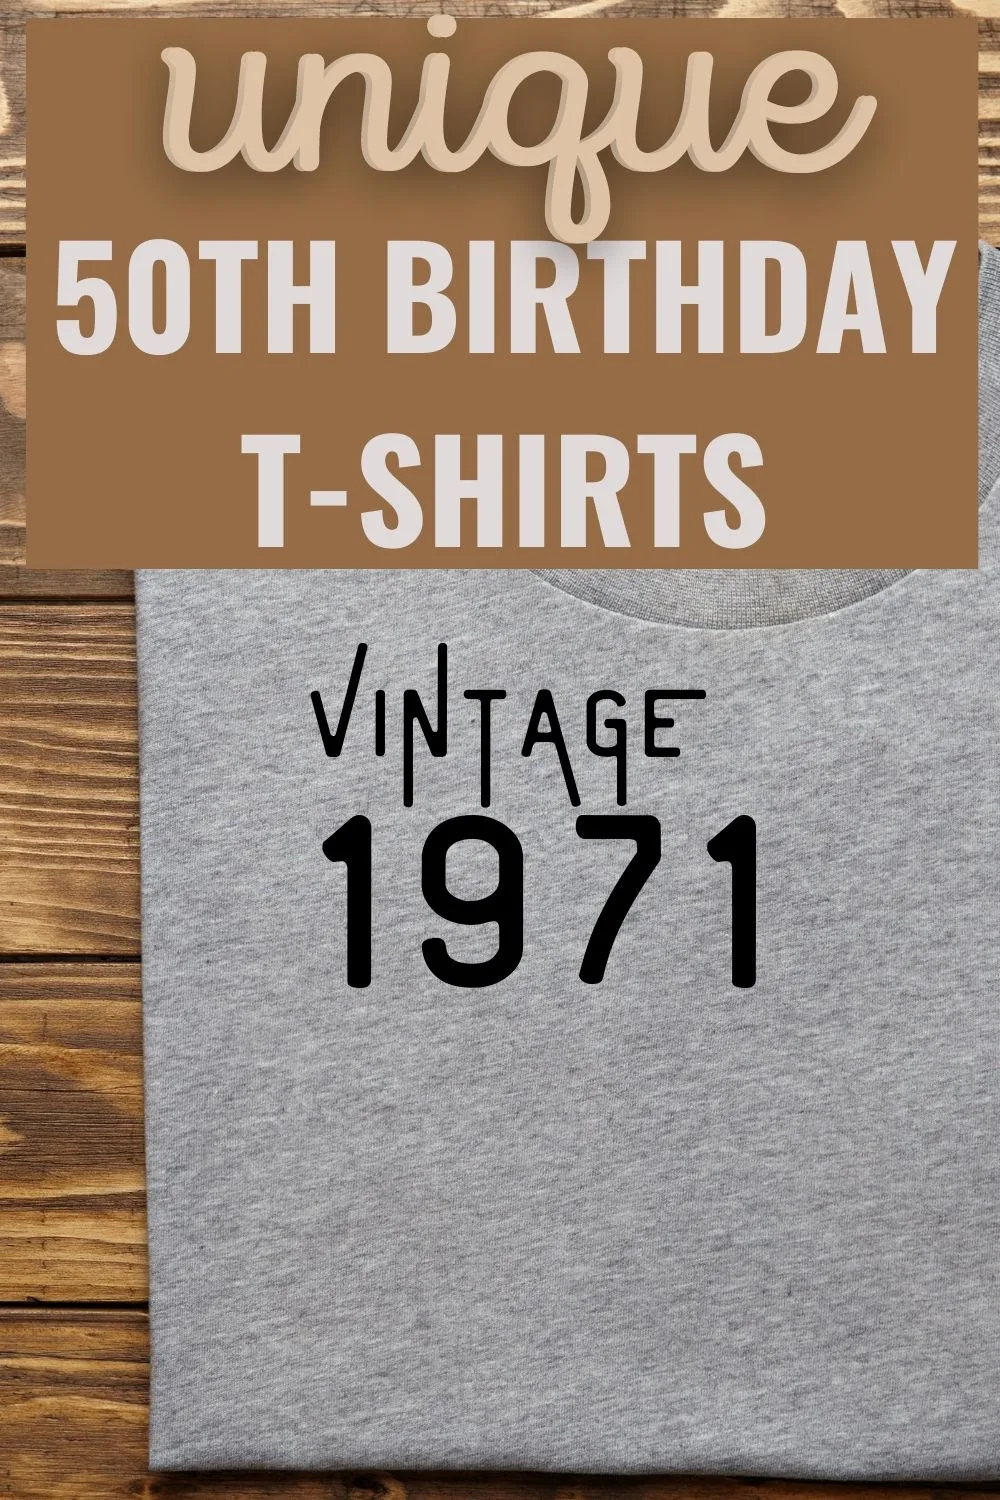 Unique 50th birtday t-shirts